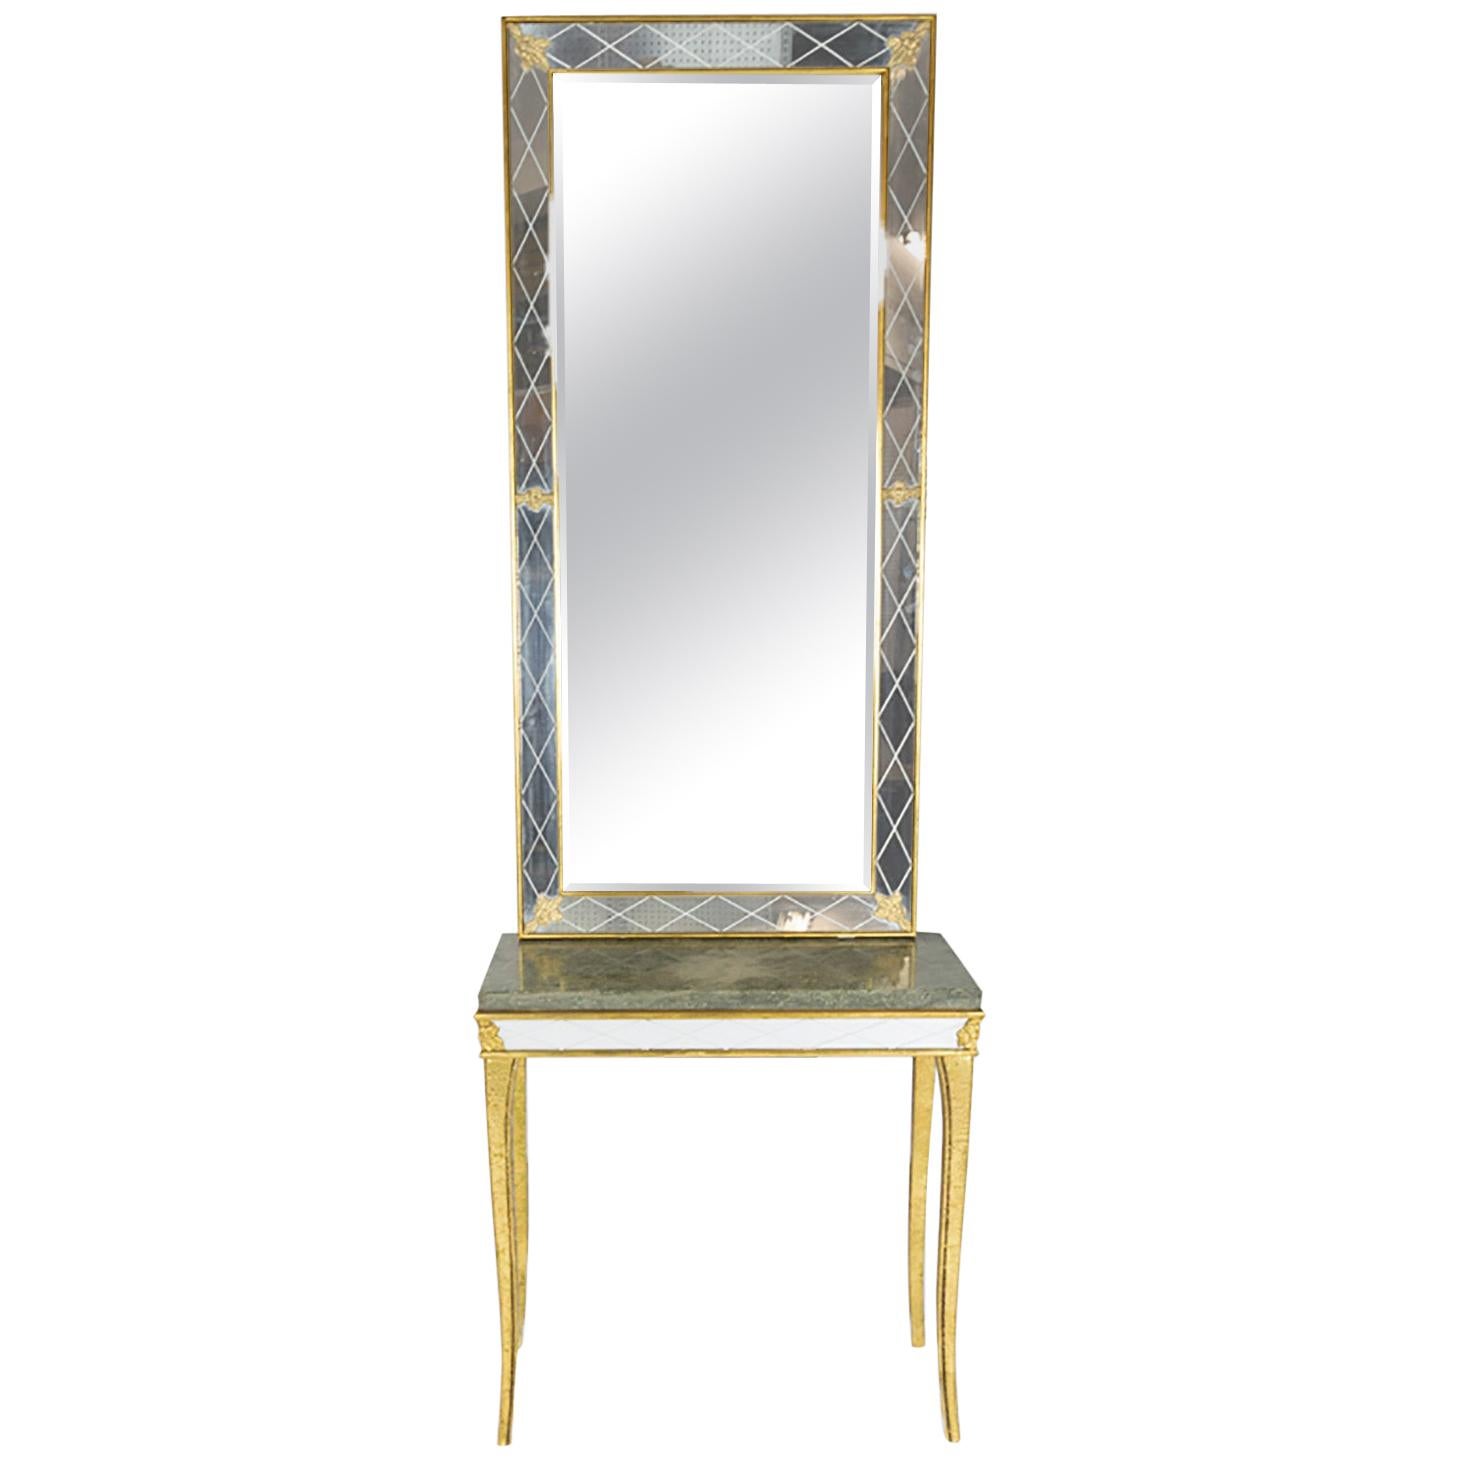 Midcentury Swedish Side Table and Mirror from Atelje G&T, 1960s For Sale